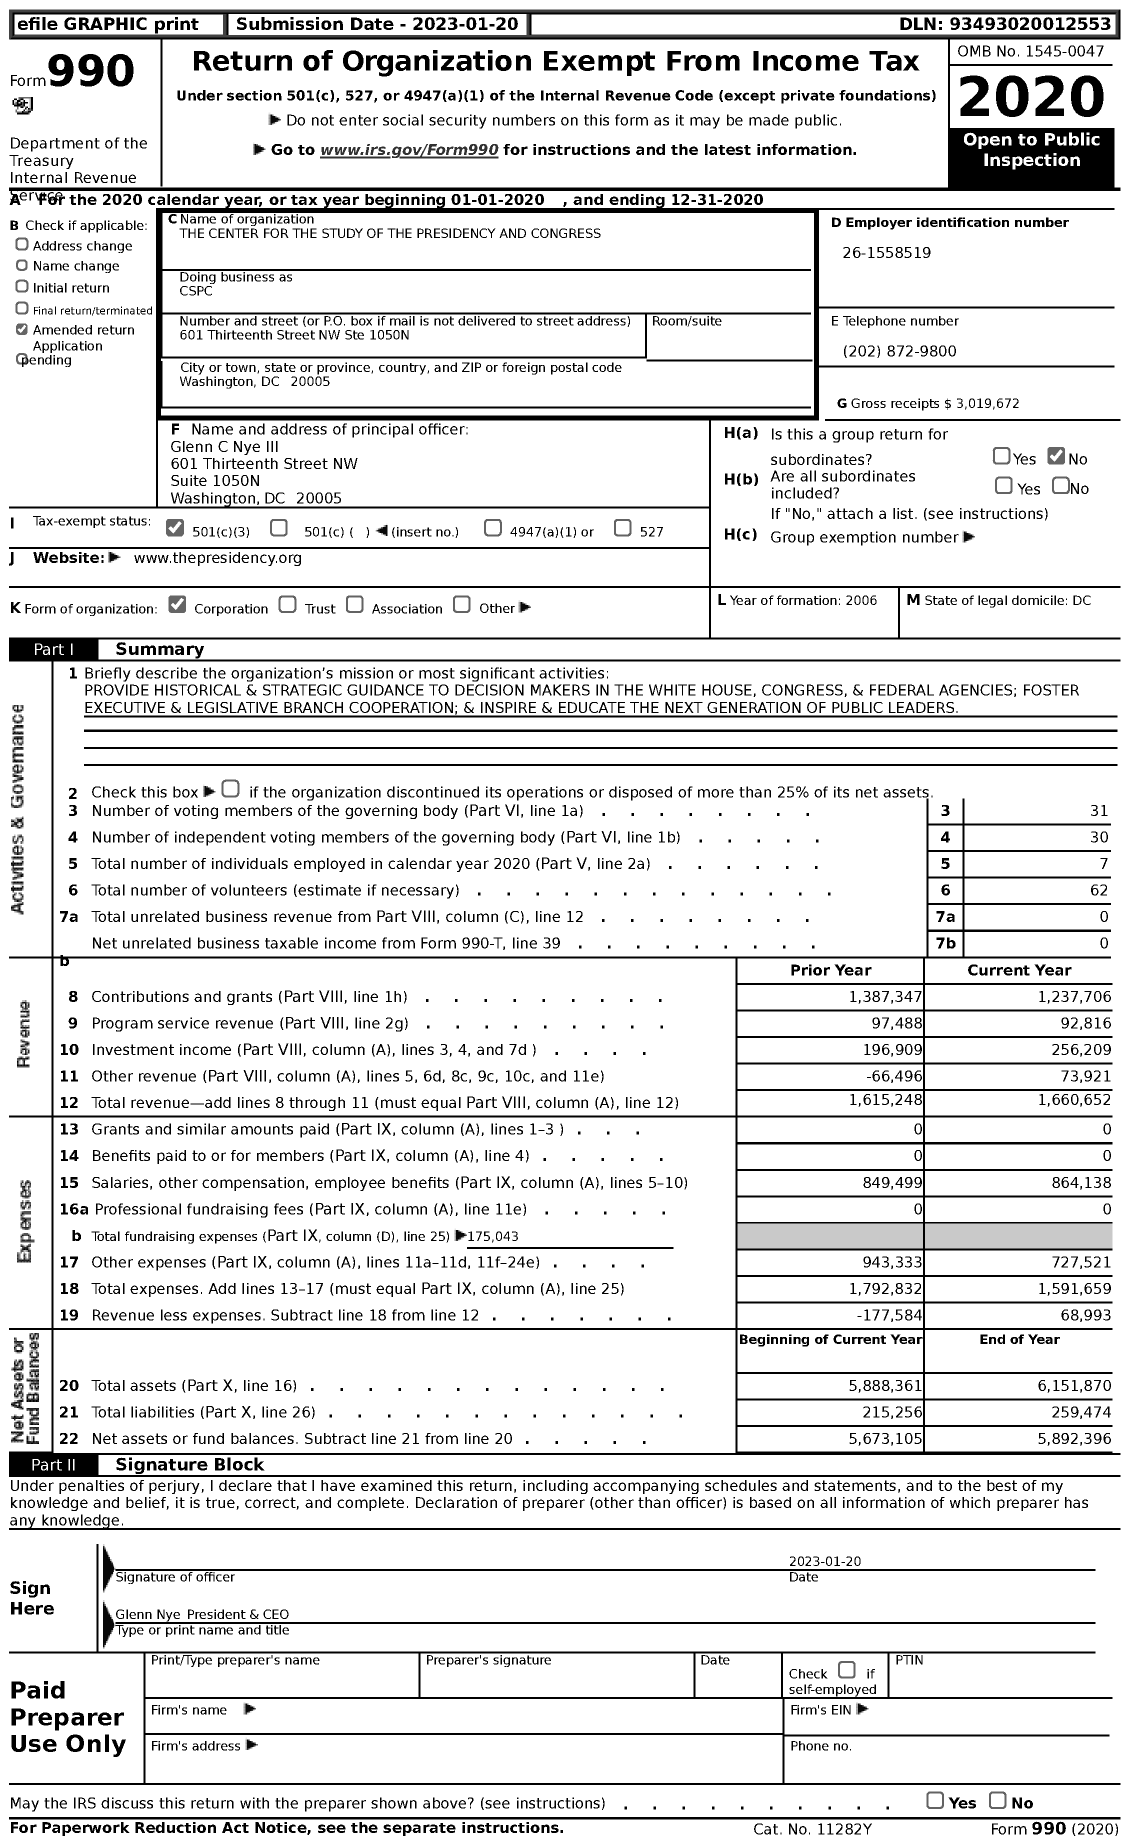 Image of first page of 2020 Form 990 for Center for the Study of the Presidency and Congress (CSPC)